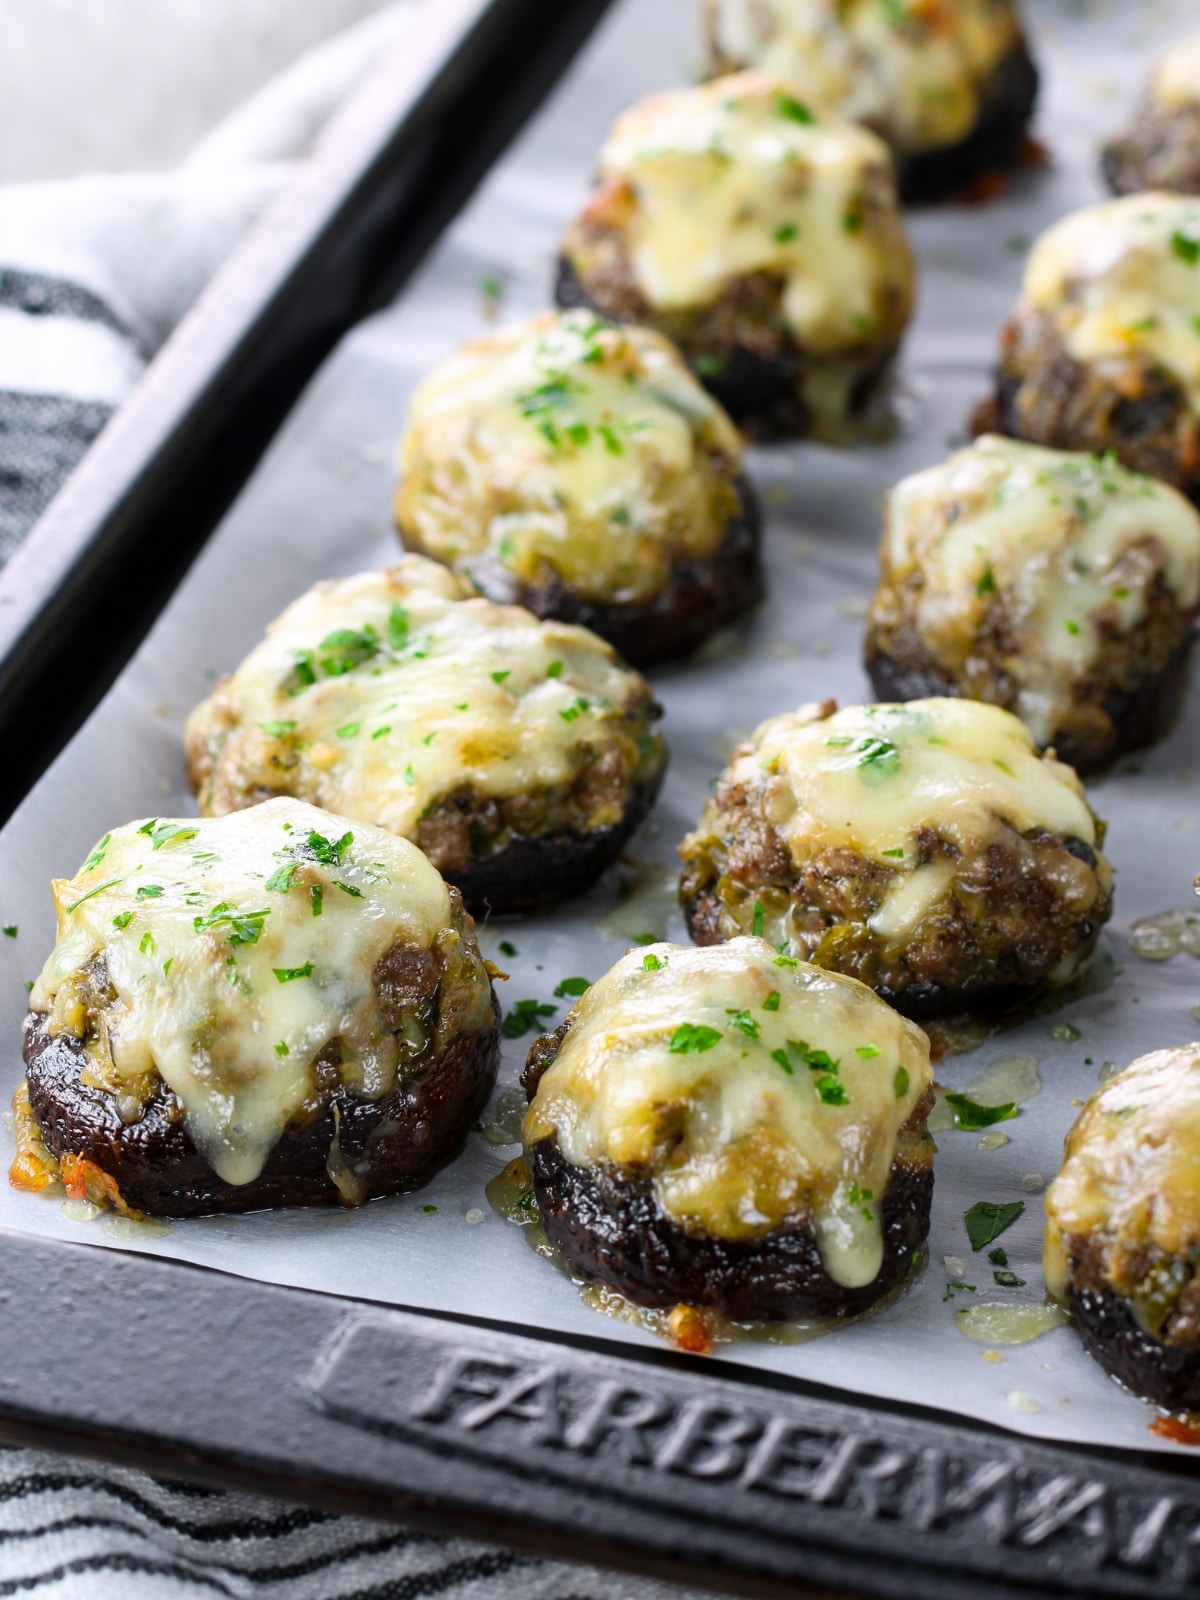 Appetizer recipes - Philly Cheesesteak Stuffed Mushrooms on a baking sheet.